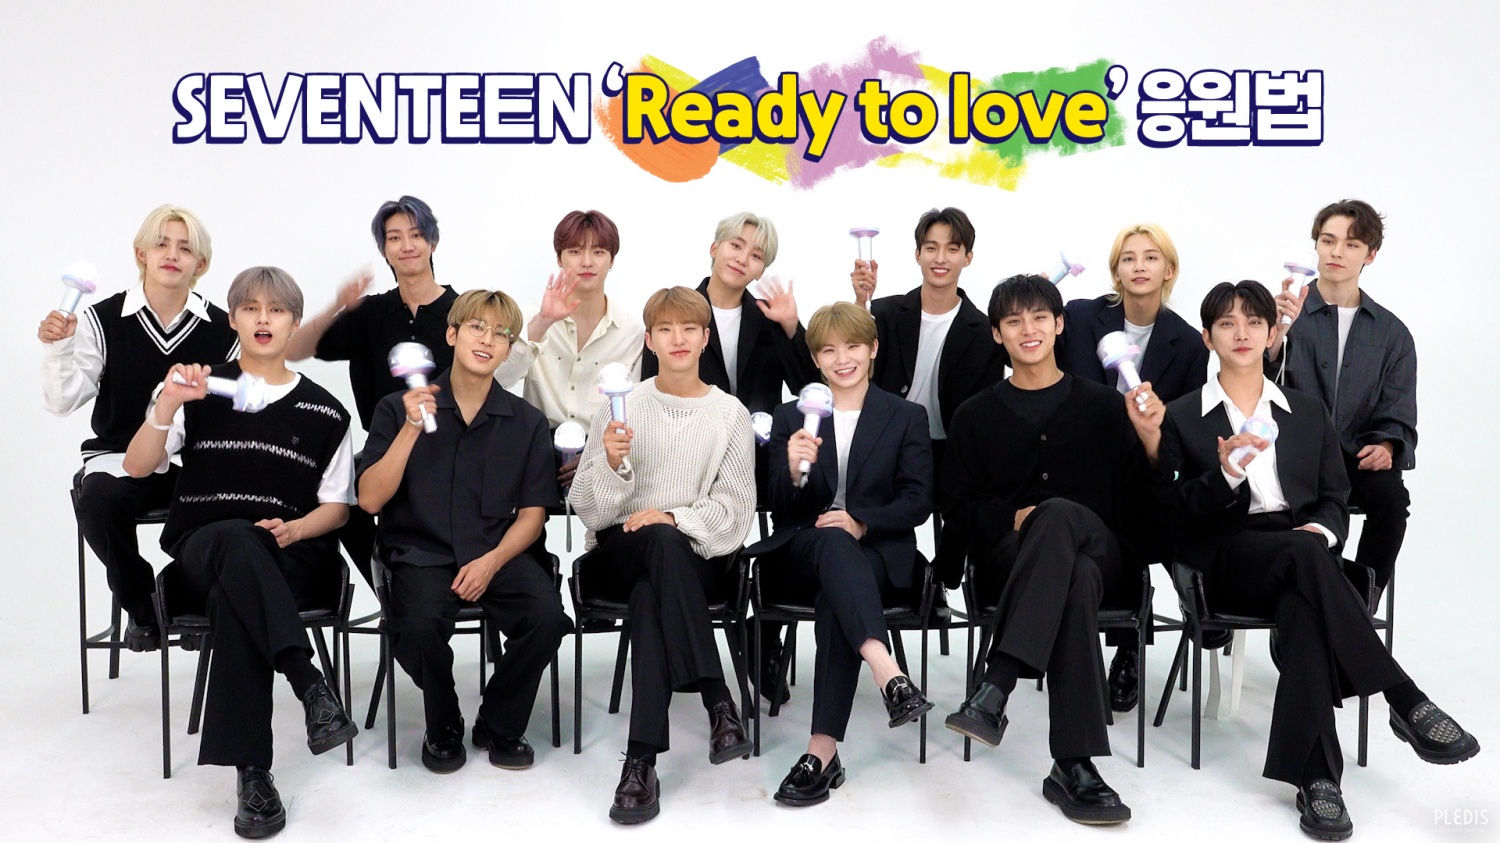 SEVENTEEN "We want to top the Billboard main chart with 'Ready to love'"